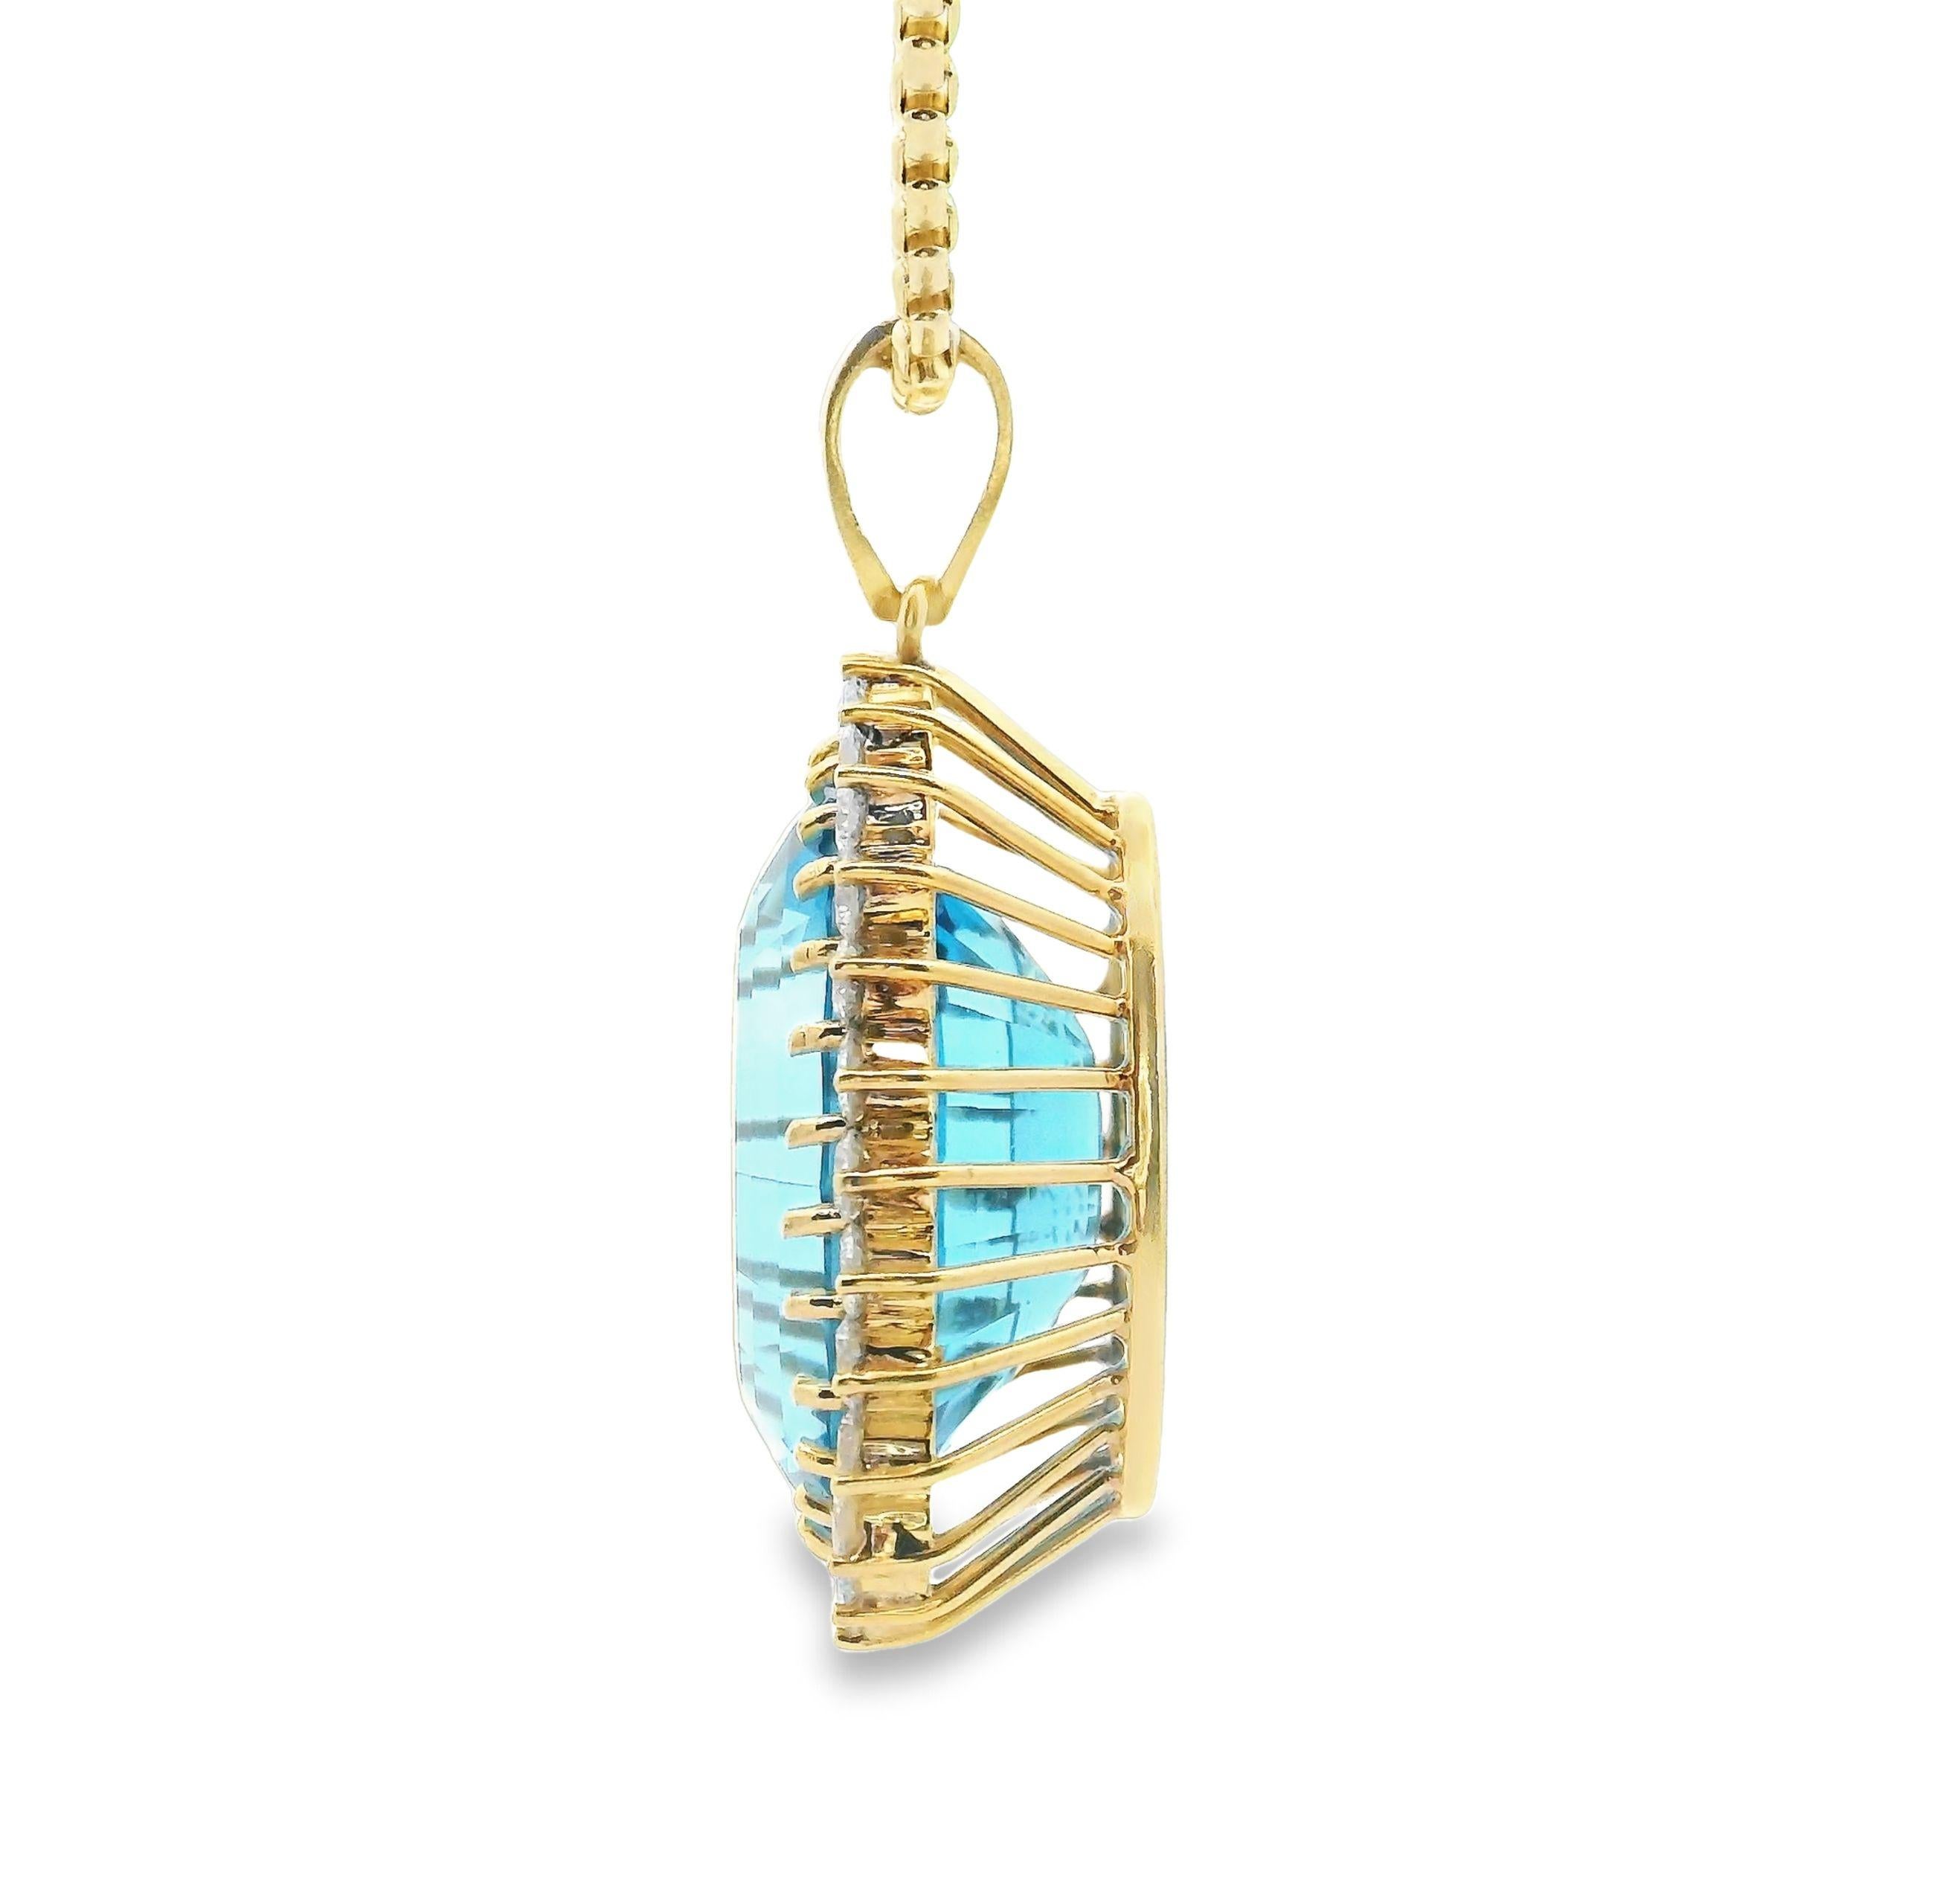 Preowned 18K yellow gold pendant featuring one oval shape London blue topaz measuring approximately 28mmx19.40mm.  The topaz is surrounded by 28 round brilliant-cut diamonds weighing approximately 3.00 carats total(E/F color, VS clarity). The